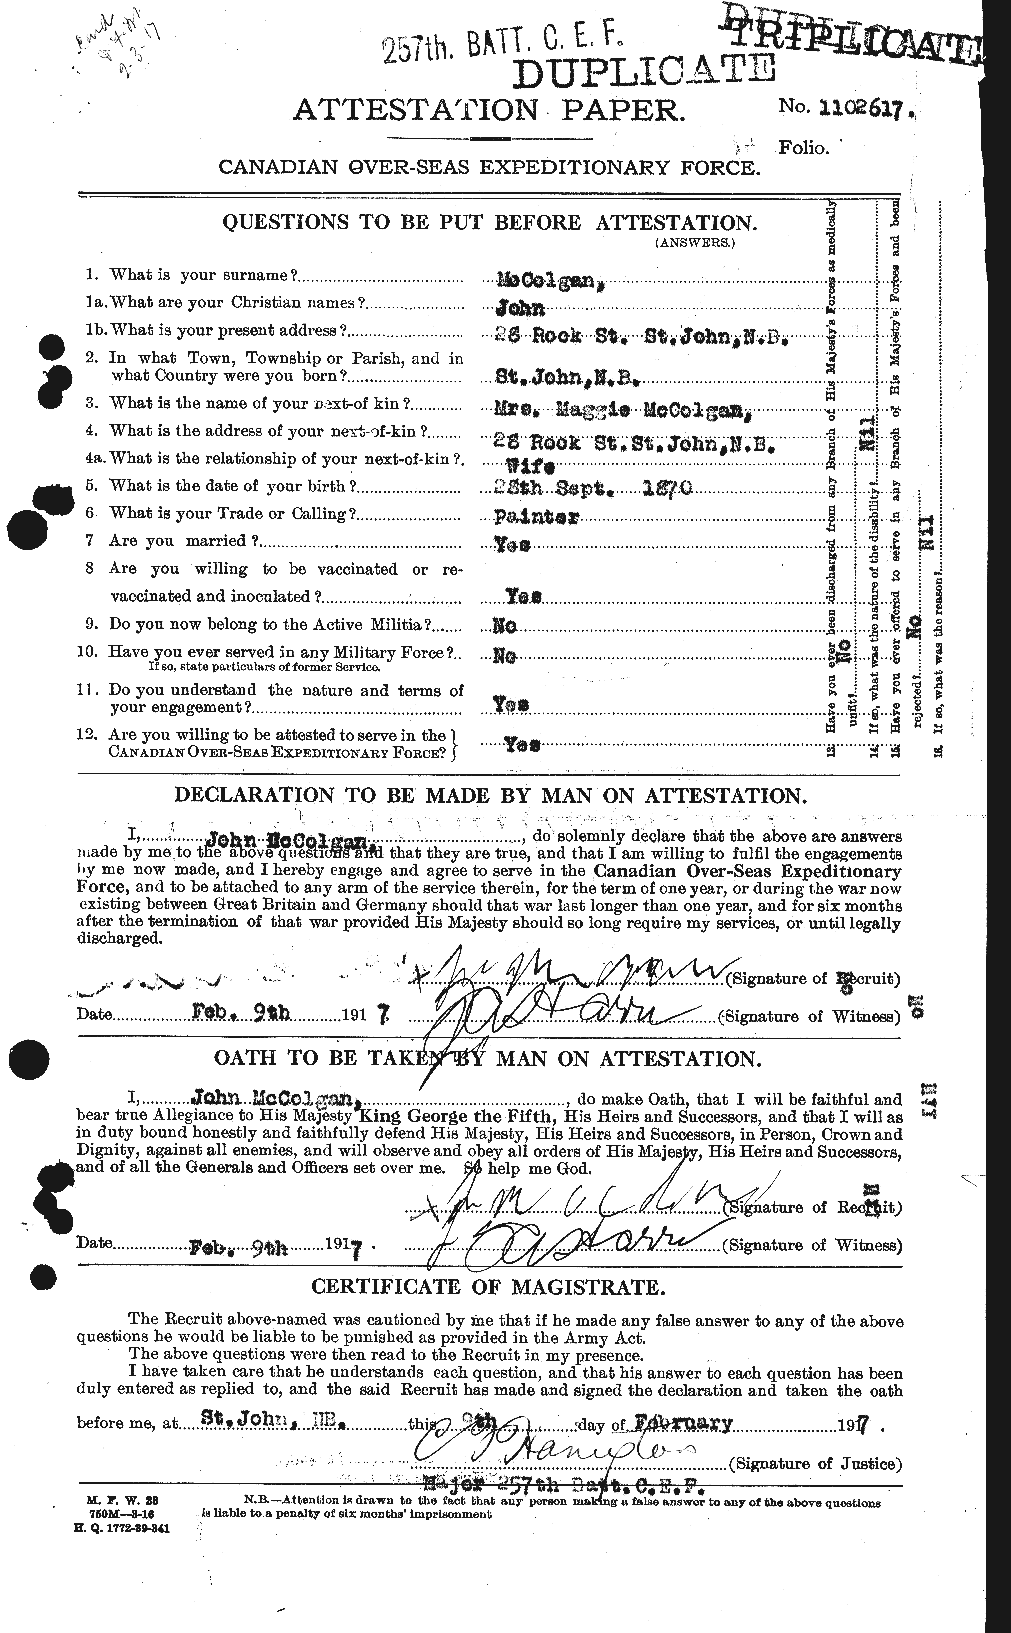 Personnel Records of the First World War - CEF 133430a